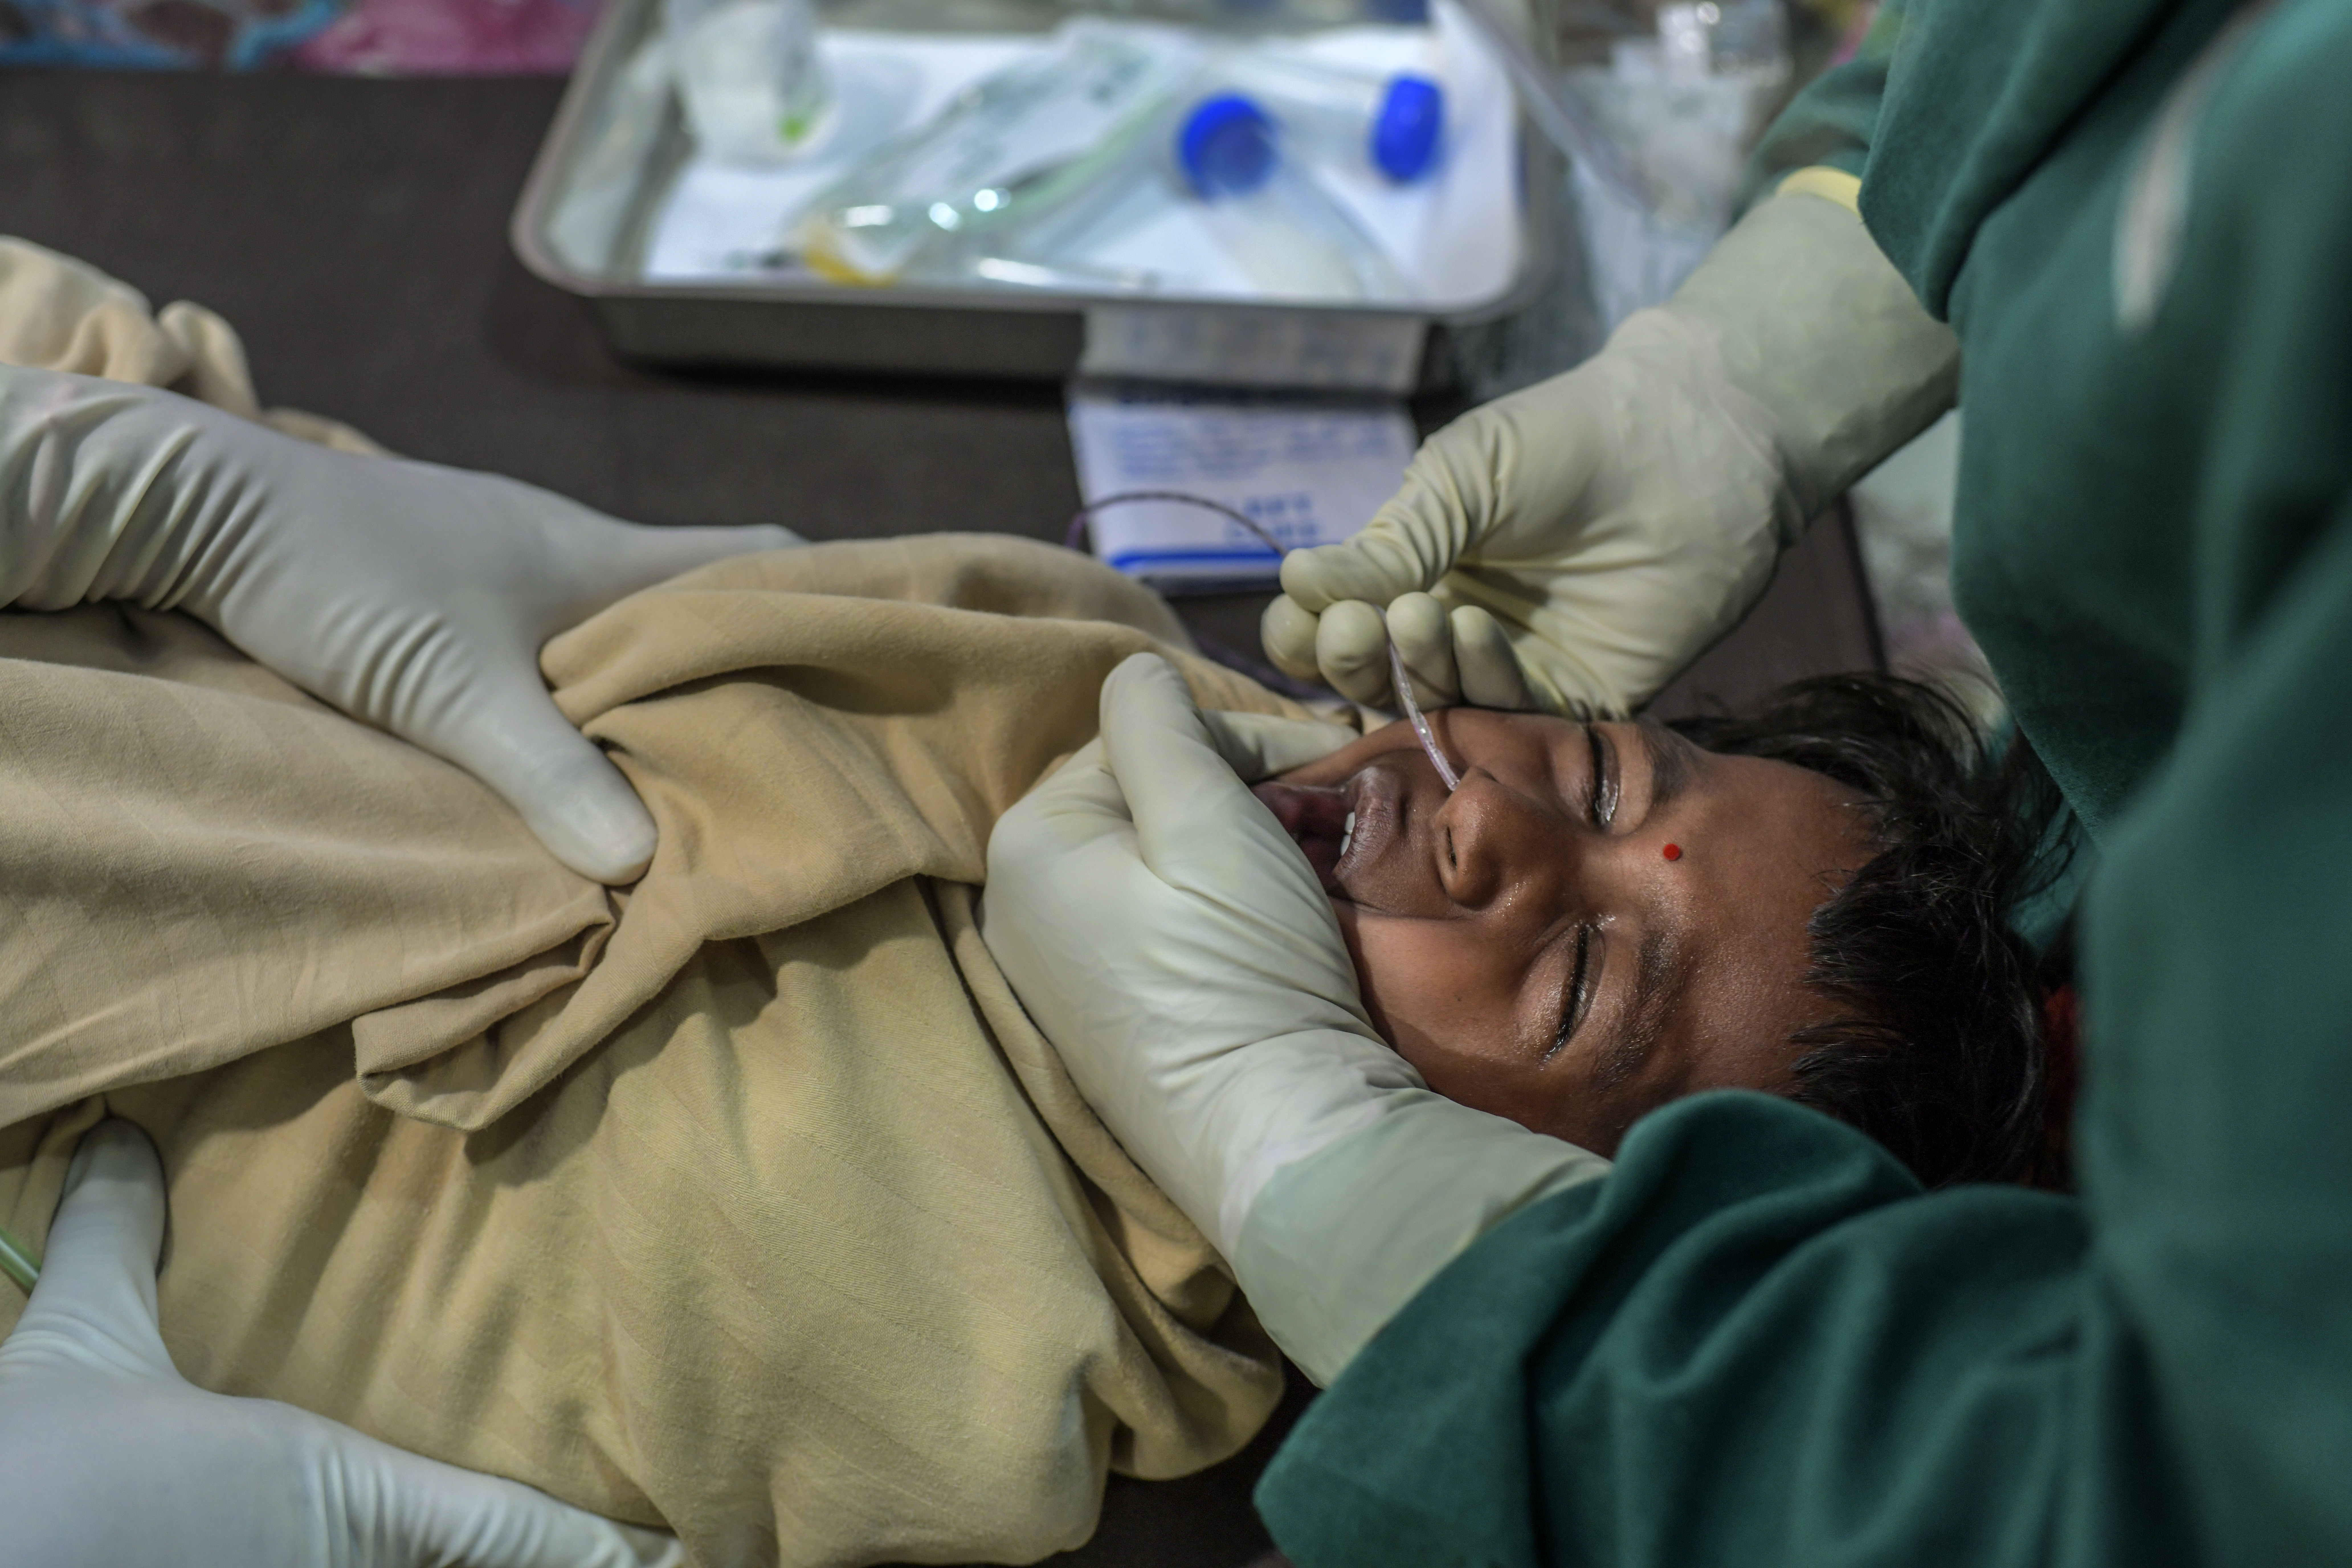 MSF Nurse inserting appropriate -sized Nasogastric tube (NG) tube to extract samples for TB diagnosis, at MSF independent Clinic, Mumbai- India. Copyright: Atul Loke/MSF